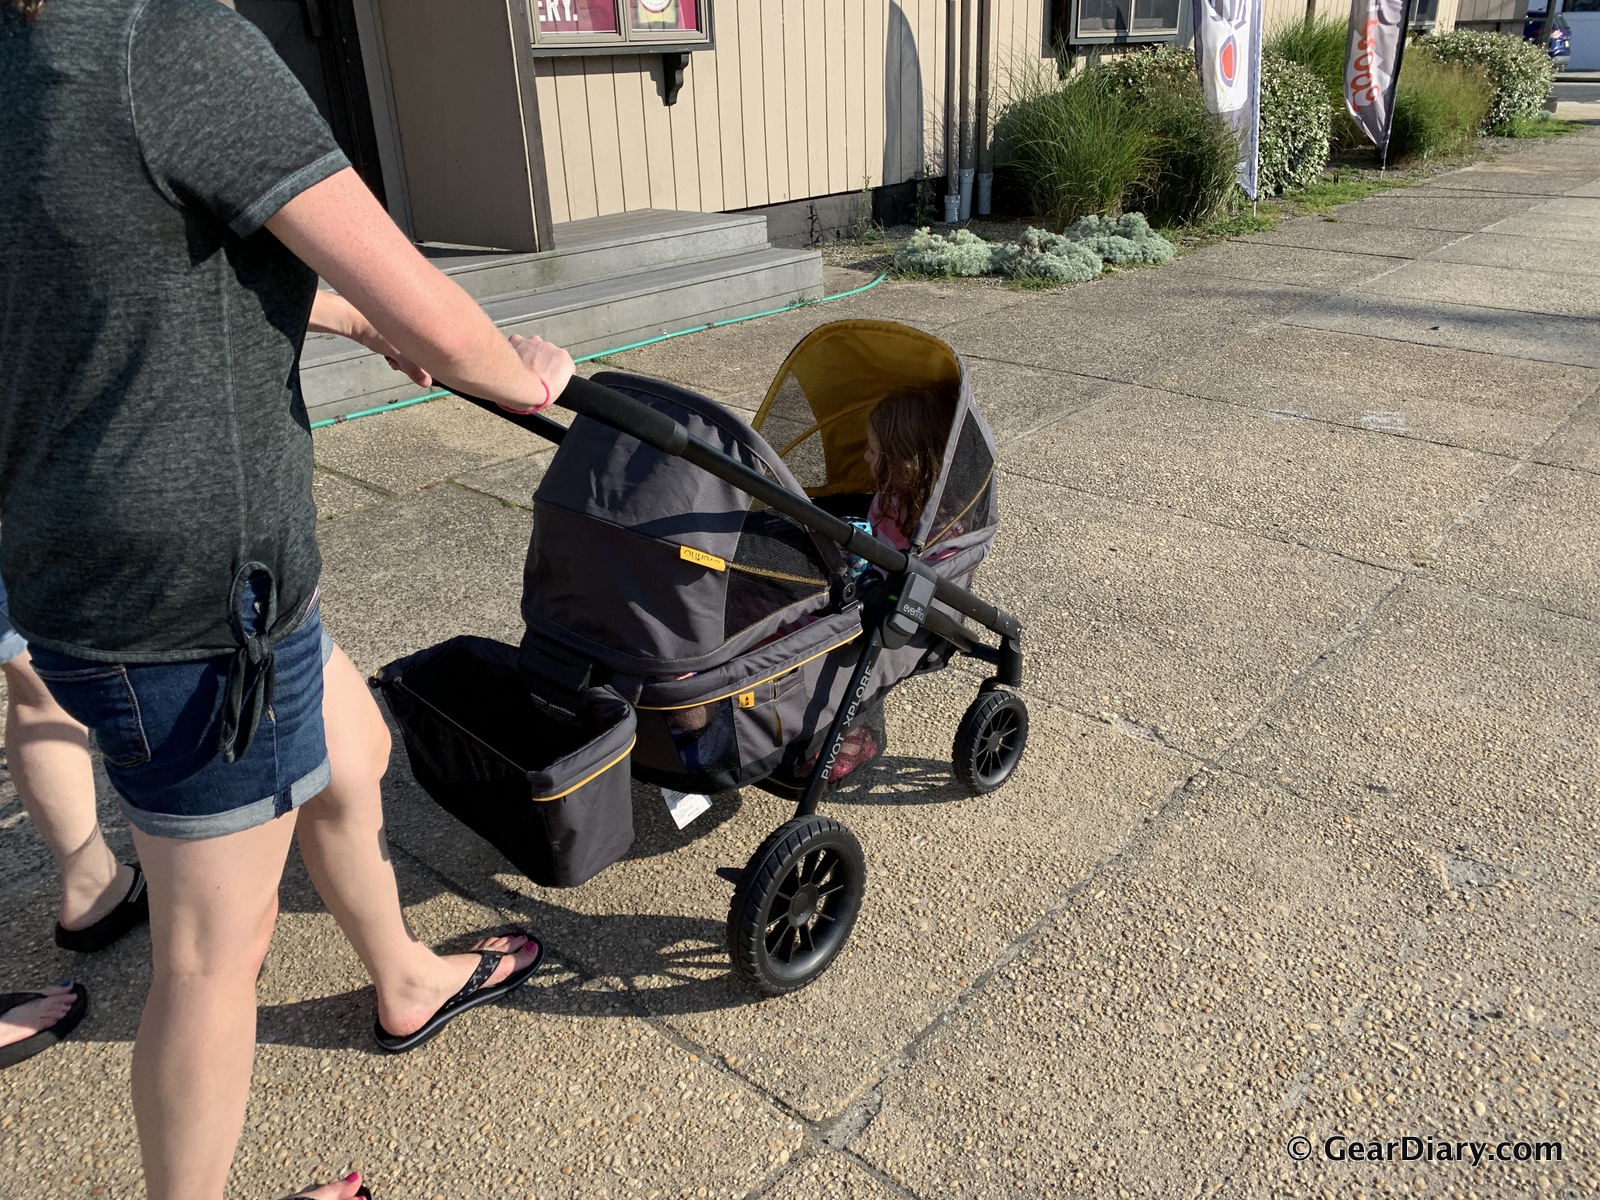 wagon stroller with car seat